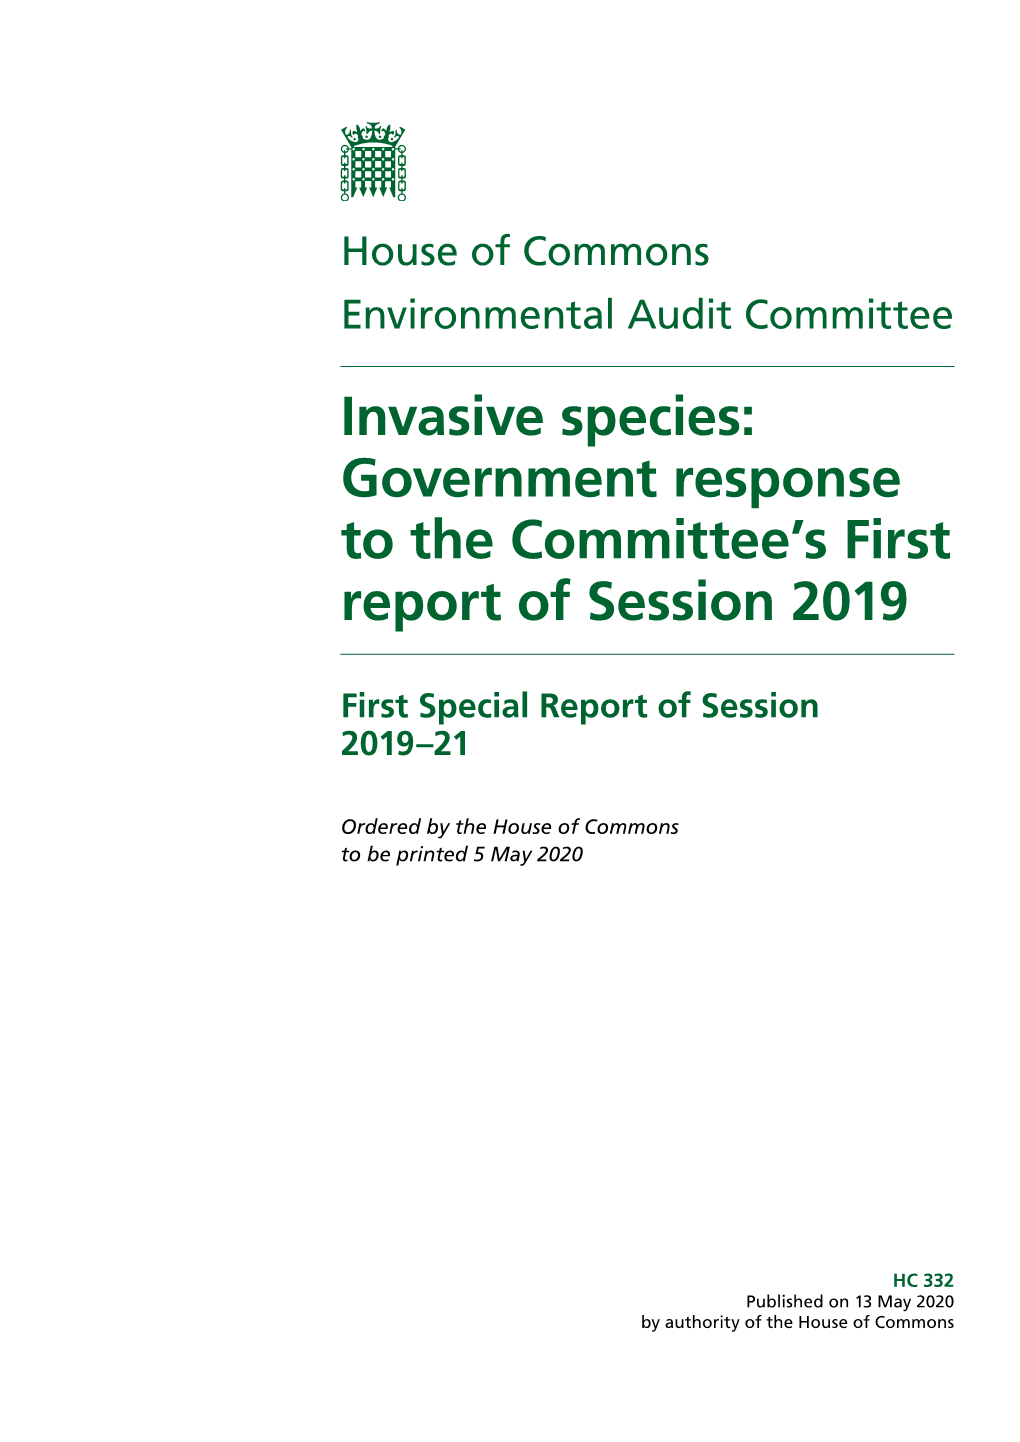 Invasive Species: Government Response to the Committee’S First Report of Session 2019